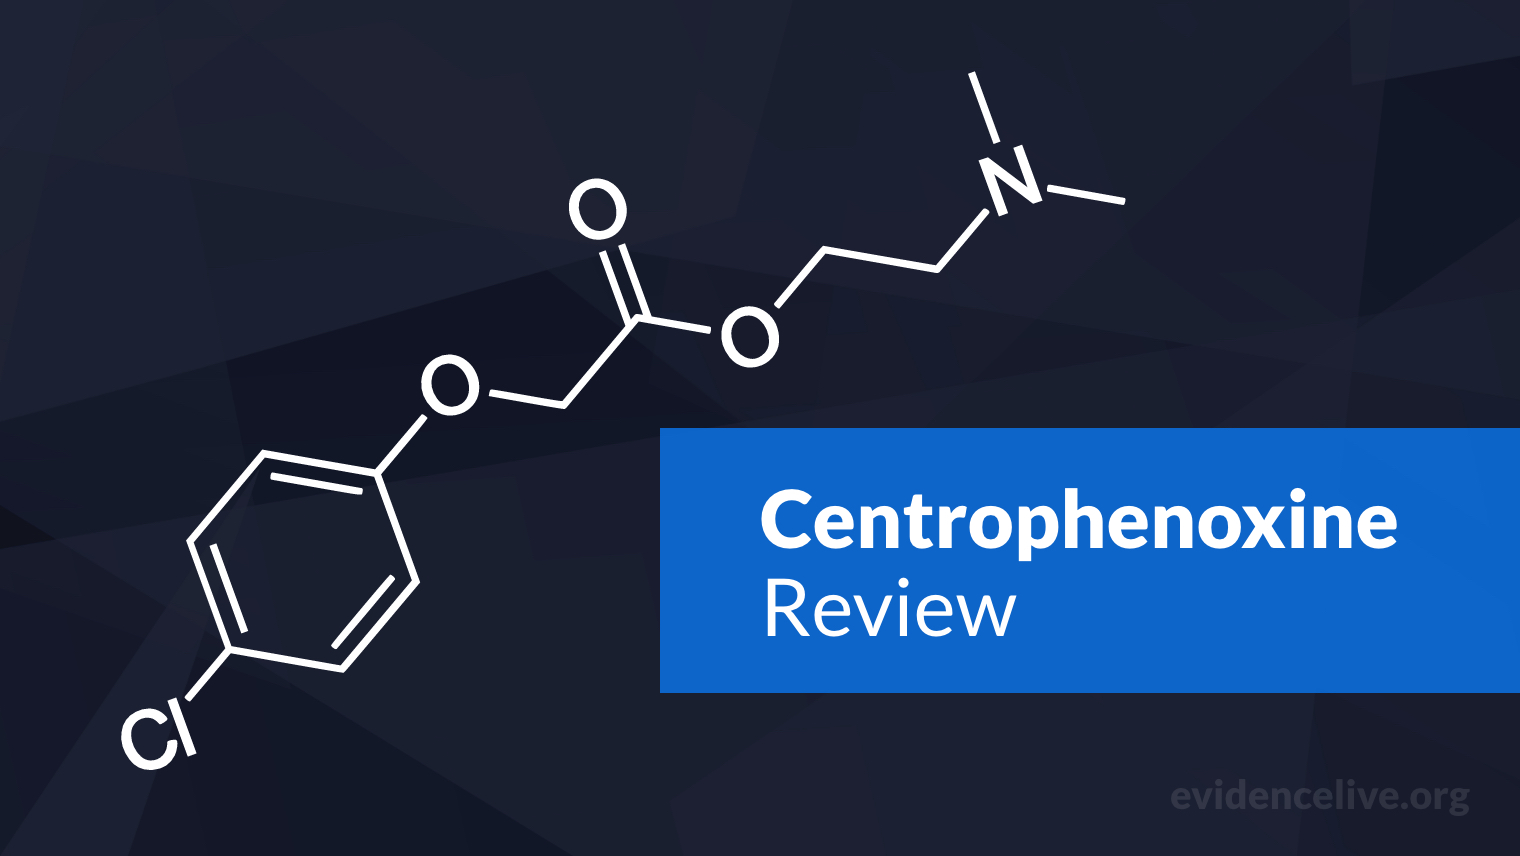 Centrophenoxine: Benefits, Uses, Dosage, and Side Effects